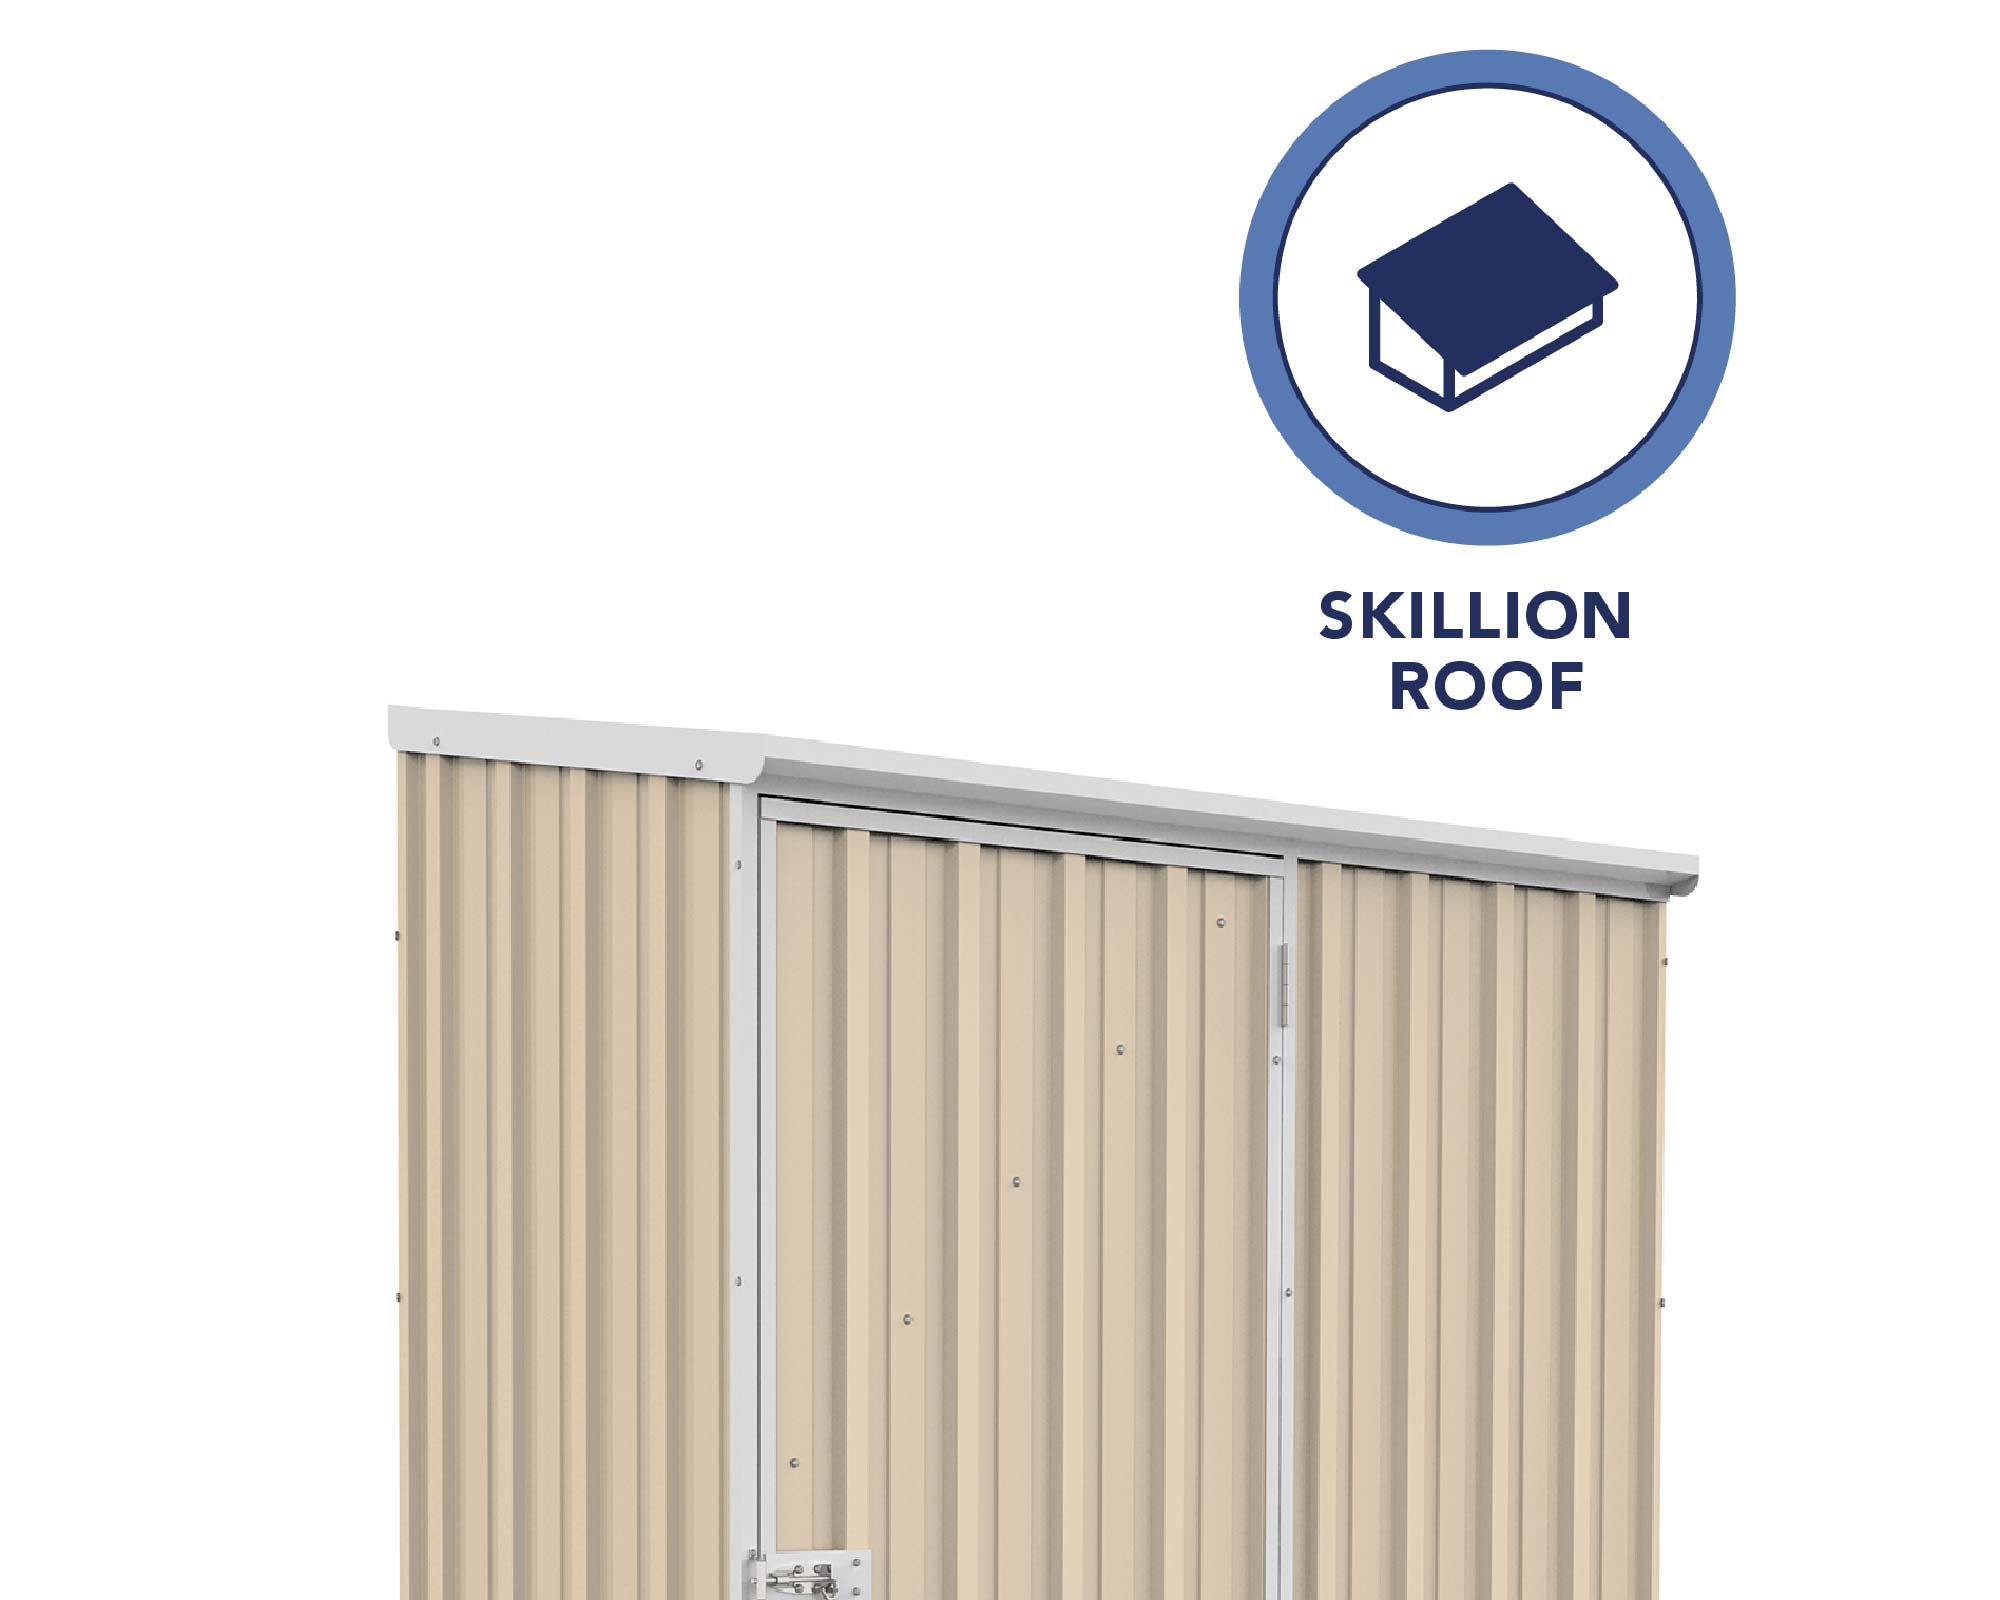 ABSCO Space Saver units with Skillion Roof